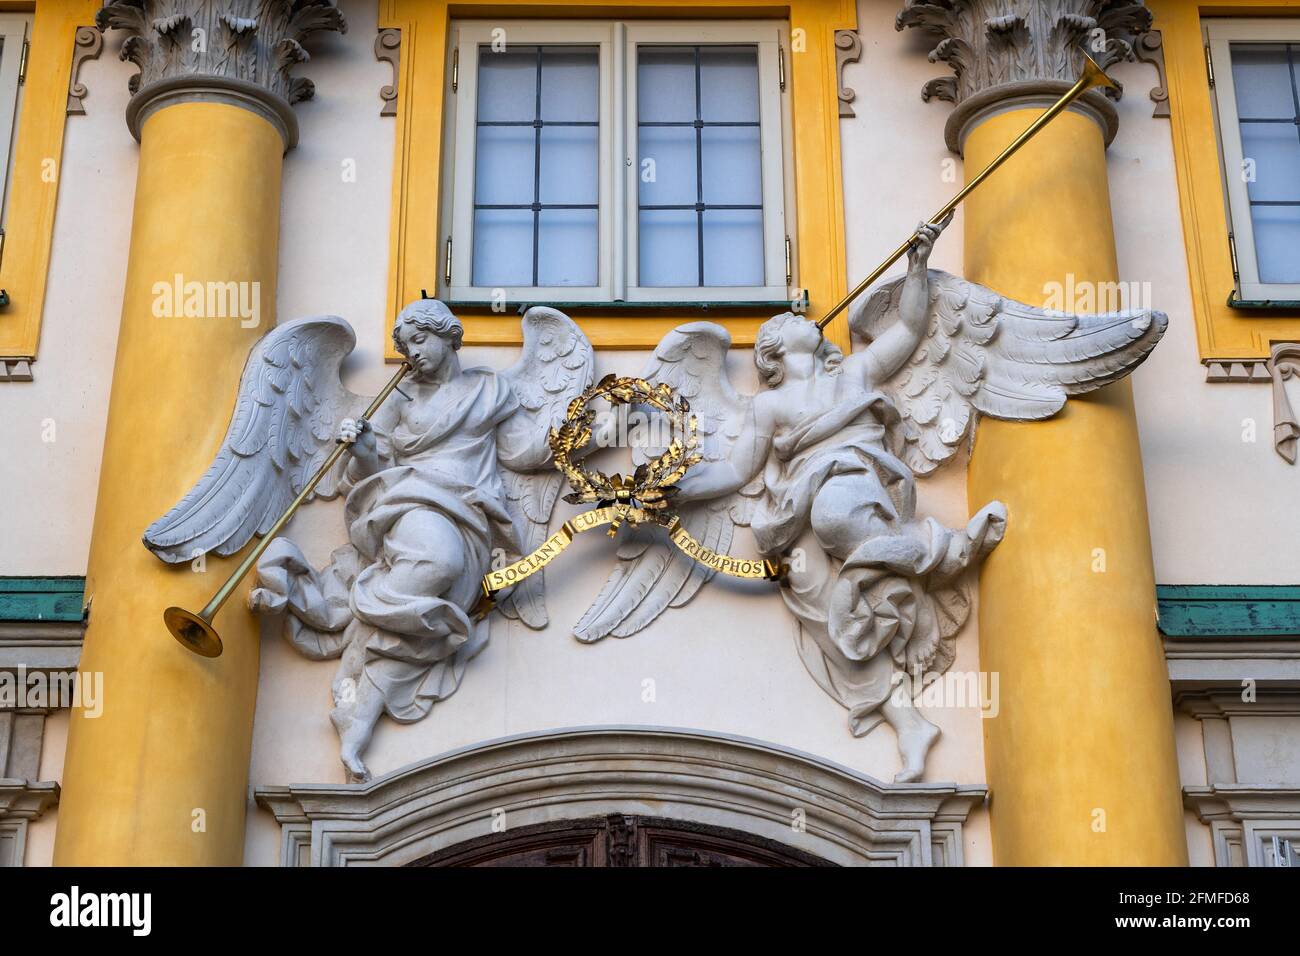 Warsaw, Poland, Wilanow Palace of King Jan III Sobieski, angels with trumpets sculptures, figures of Famae above the main entrance holding inscription Stock Photo